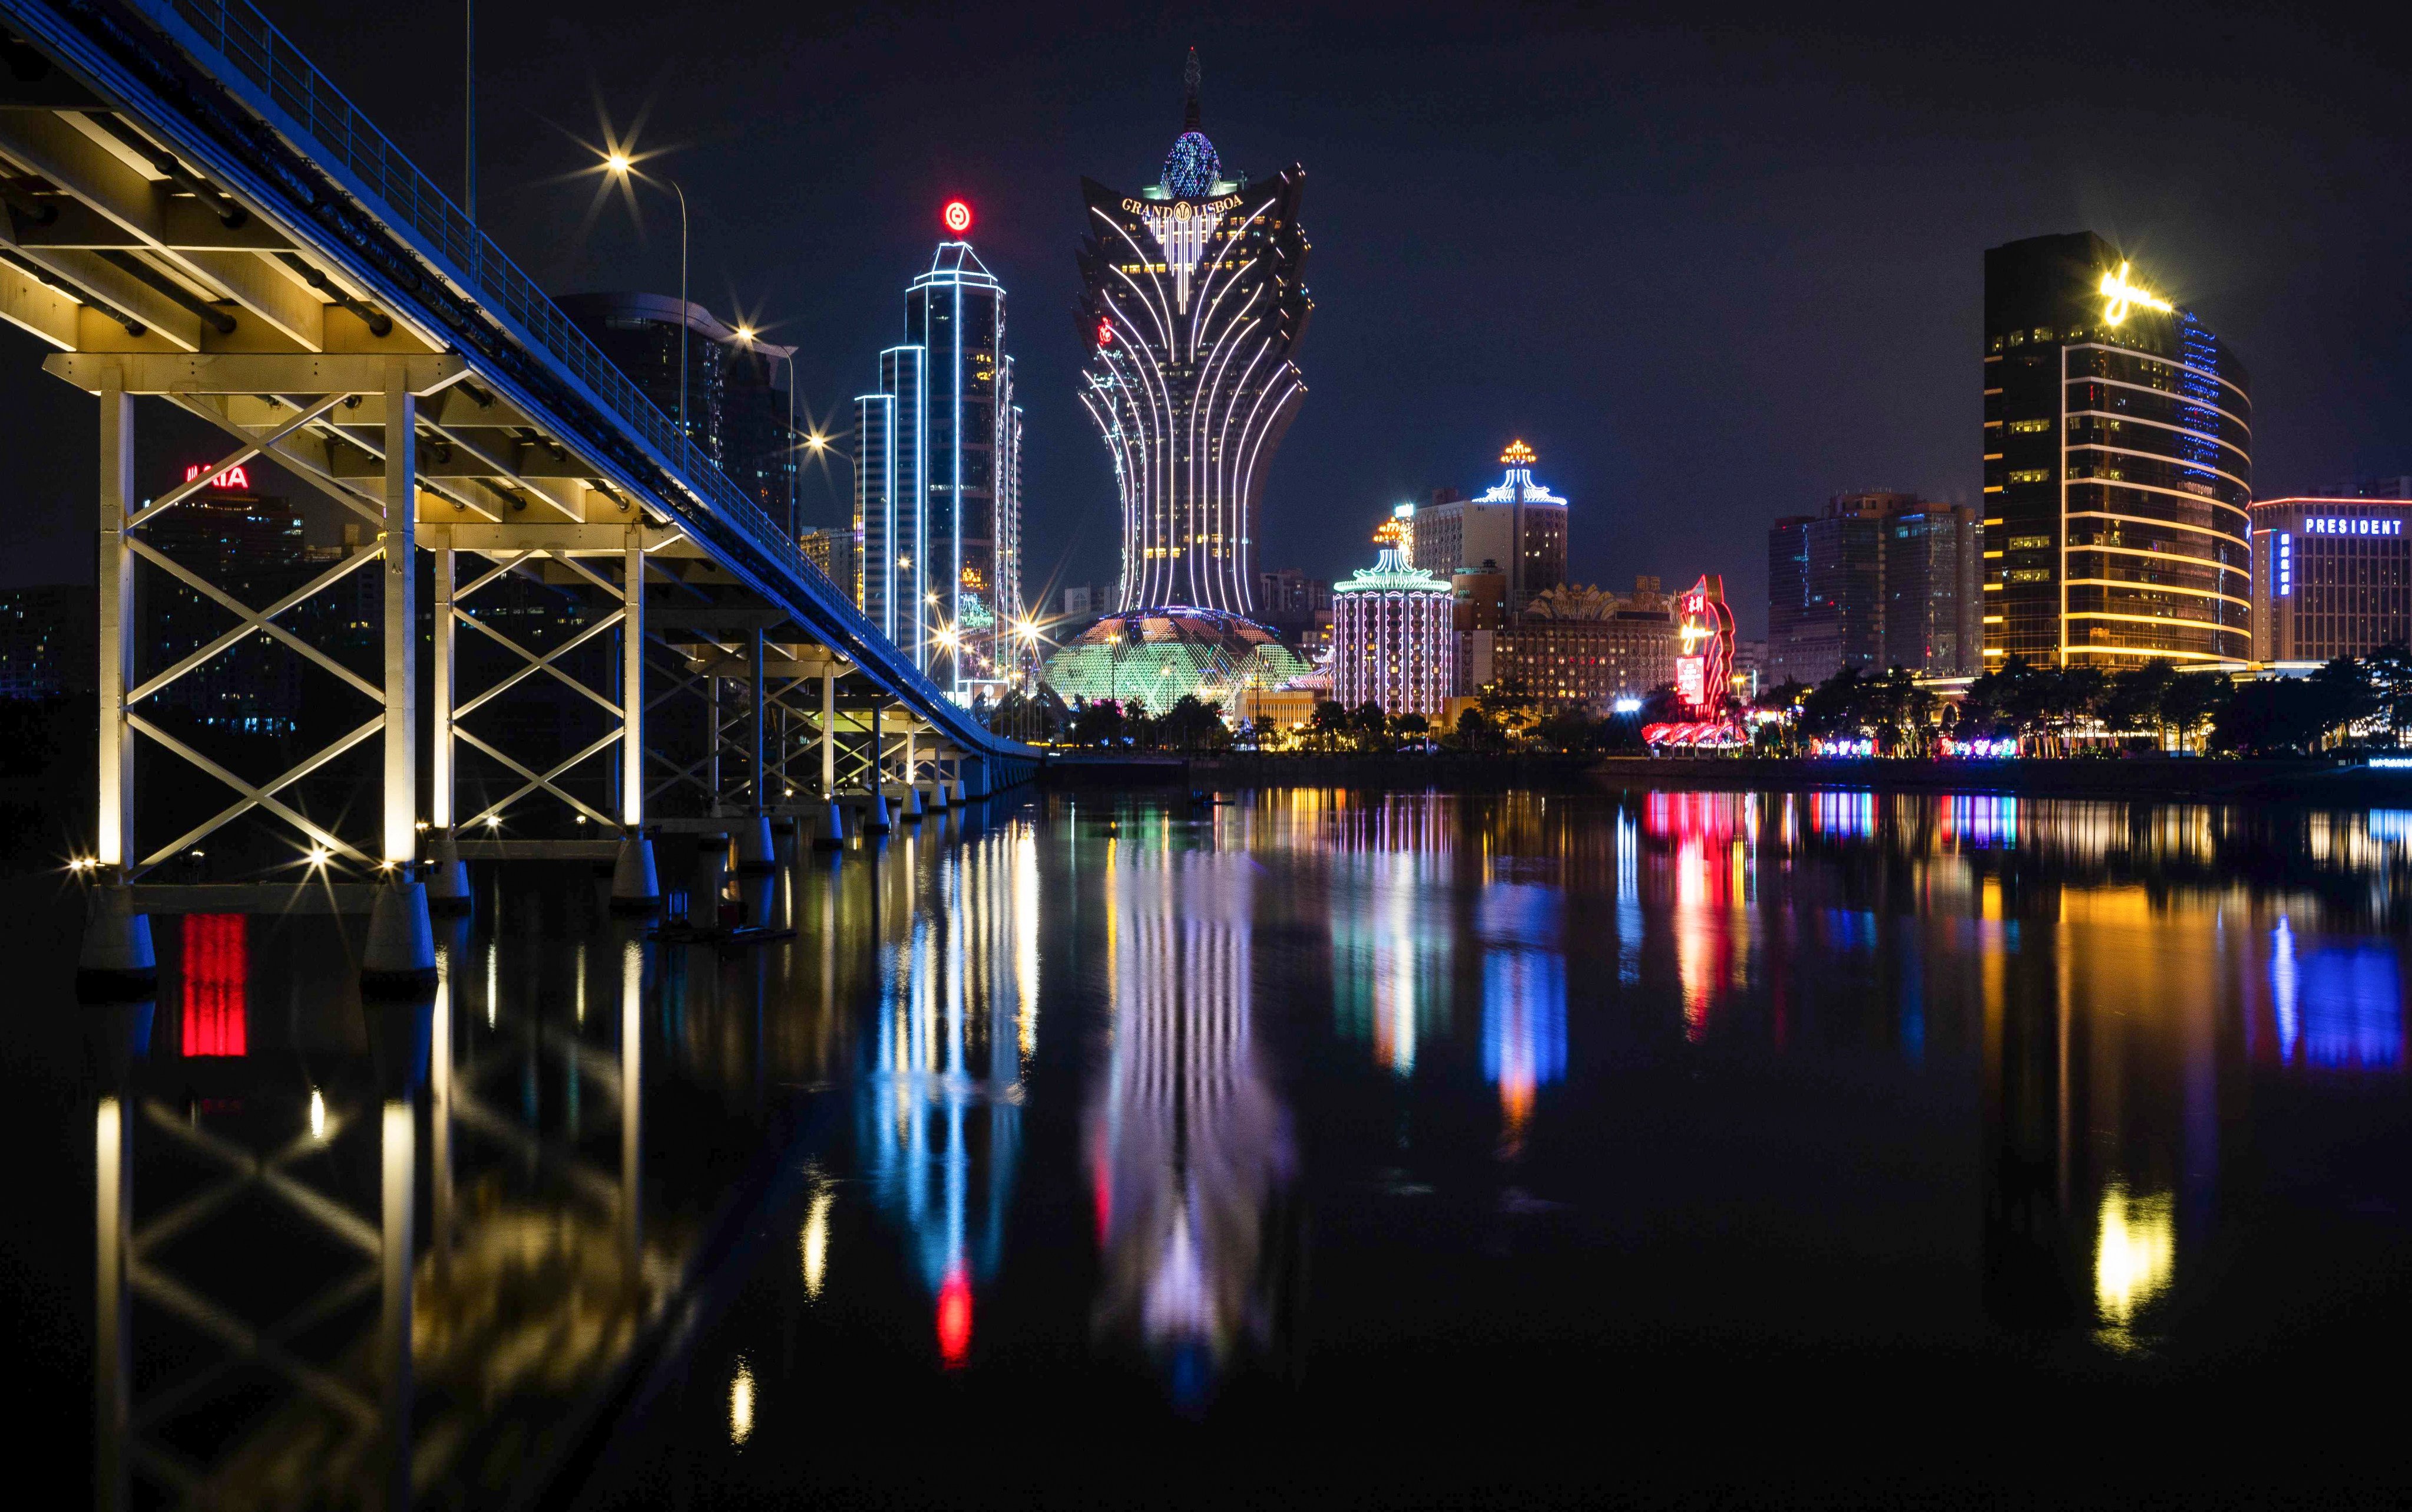 A general view of Bank of China (left), Grand Lisboa and Casino Lisboa (centre) and Wynn Macau (right) in Macau on December 15, 2019. Photo: AFP